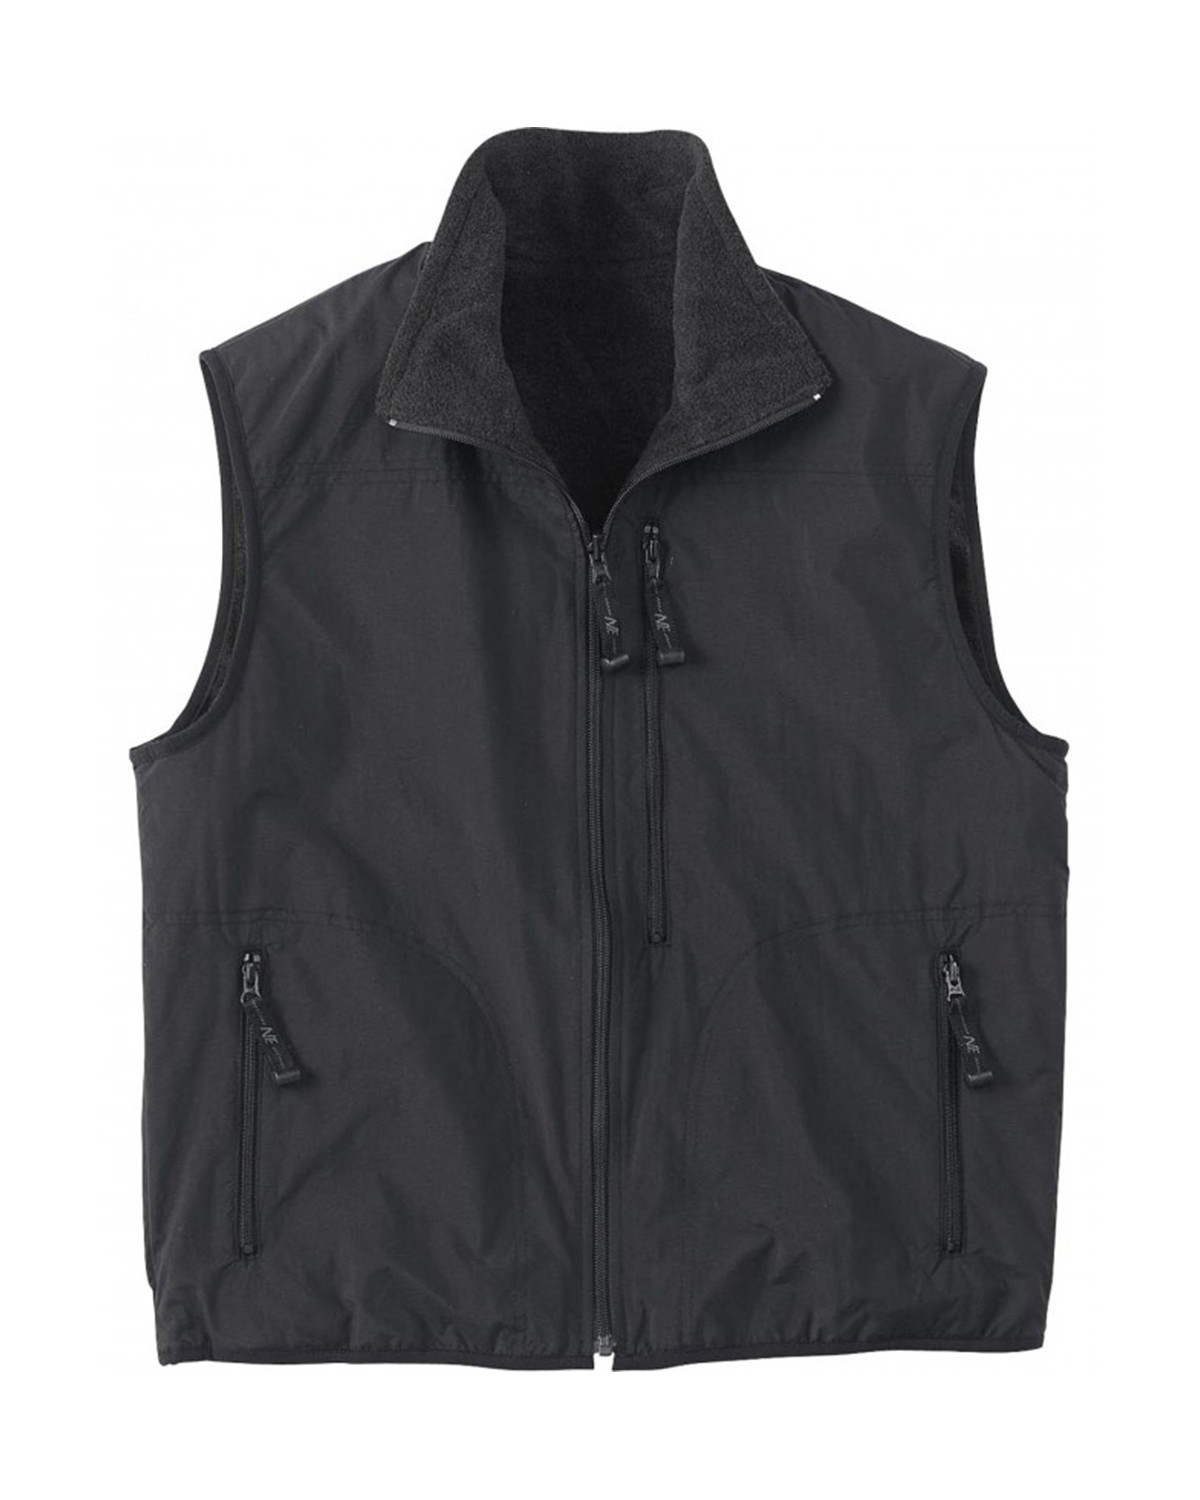 North End 88019 MENS TECHNO LITE REVERSIBLE VEST - Free Shipping Available